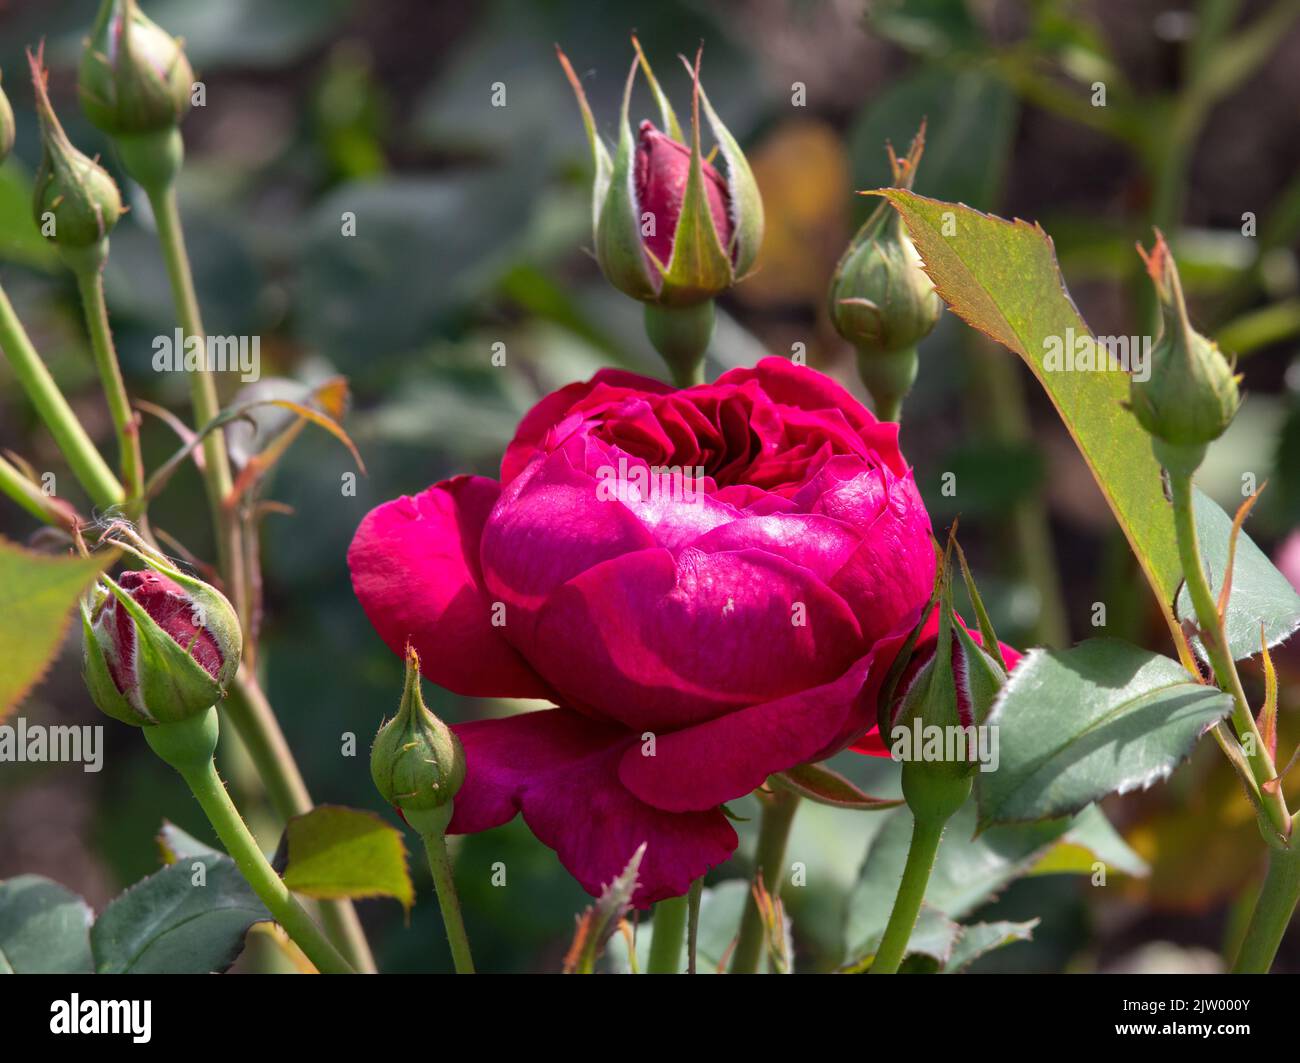 Rosa Darcey Bussell Foto Stock